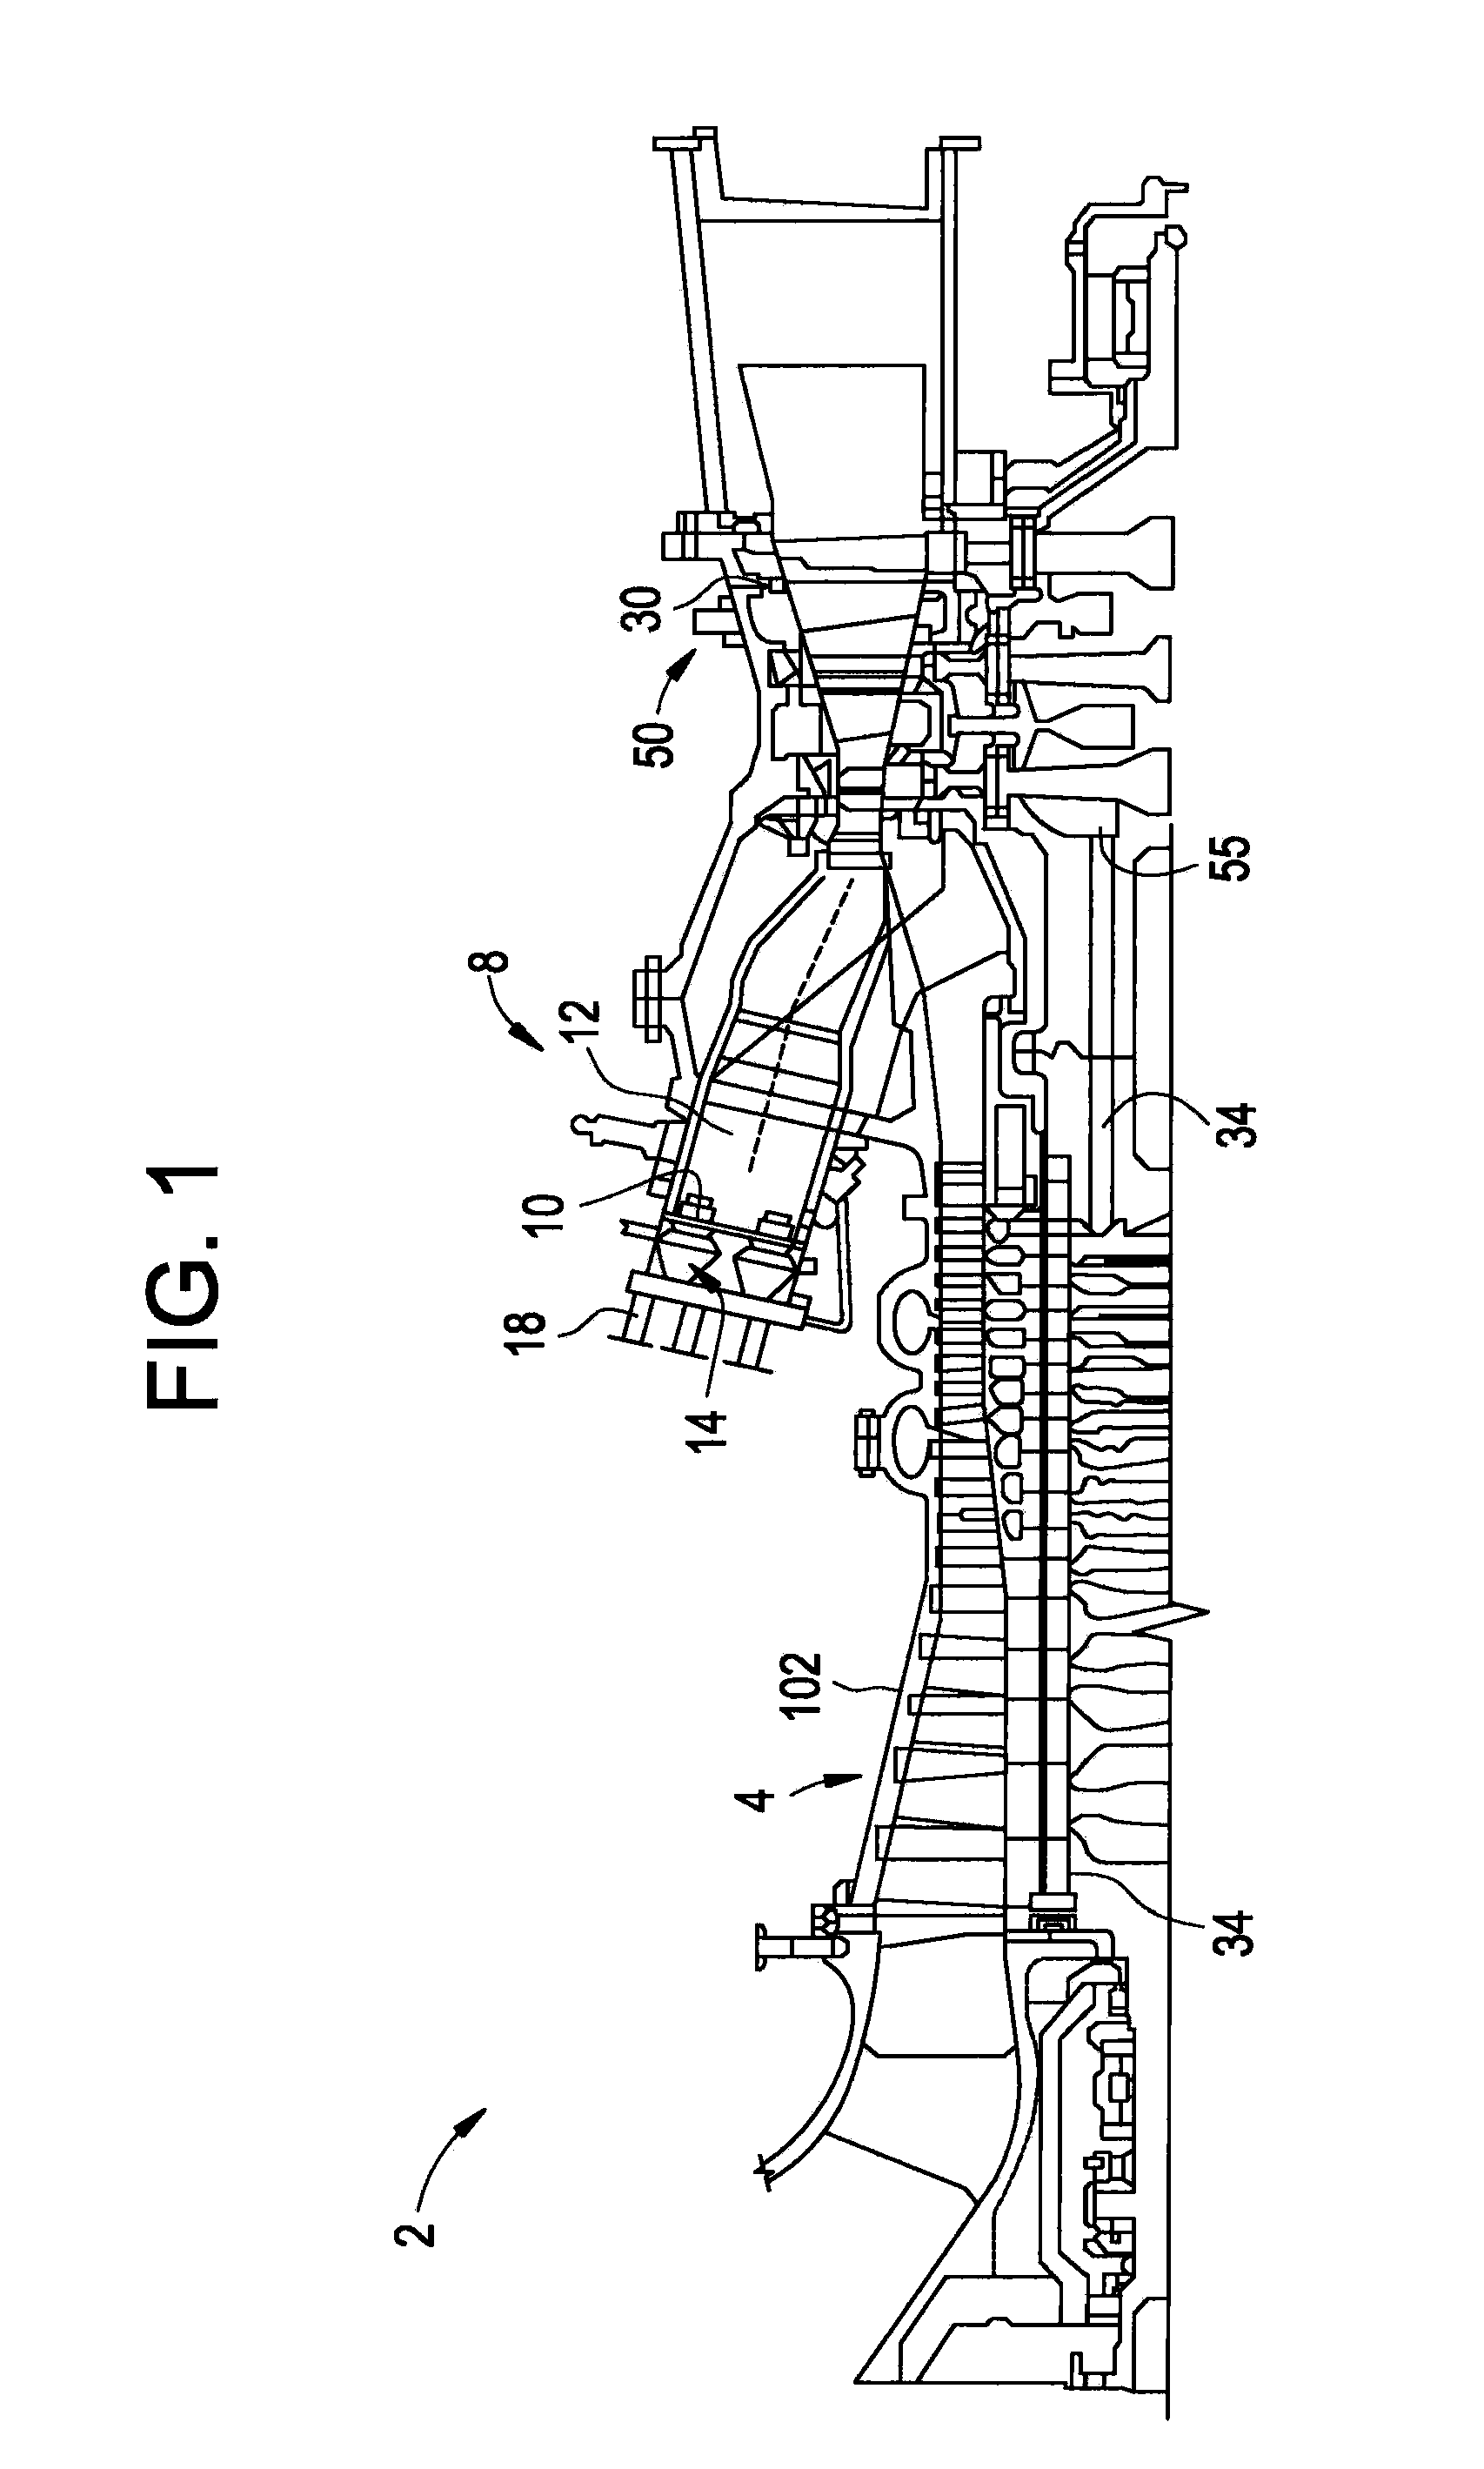 Turbomachine injection nozzle including a coolant delivery system